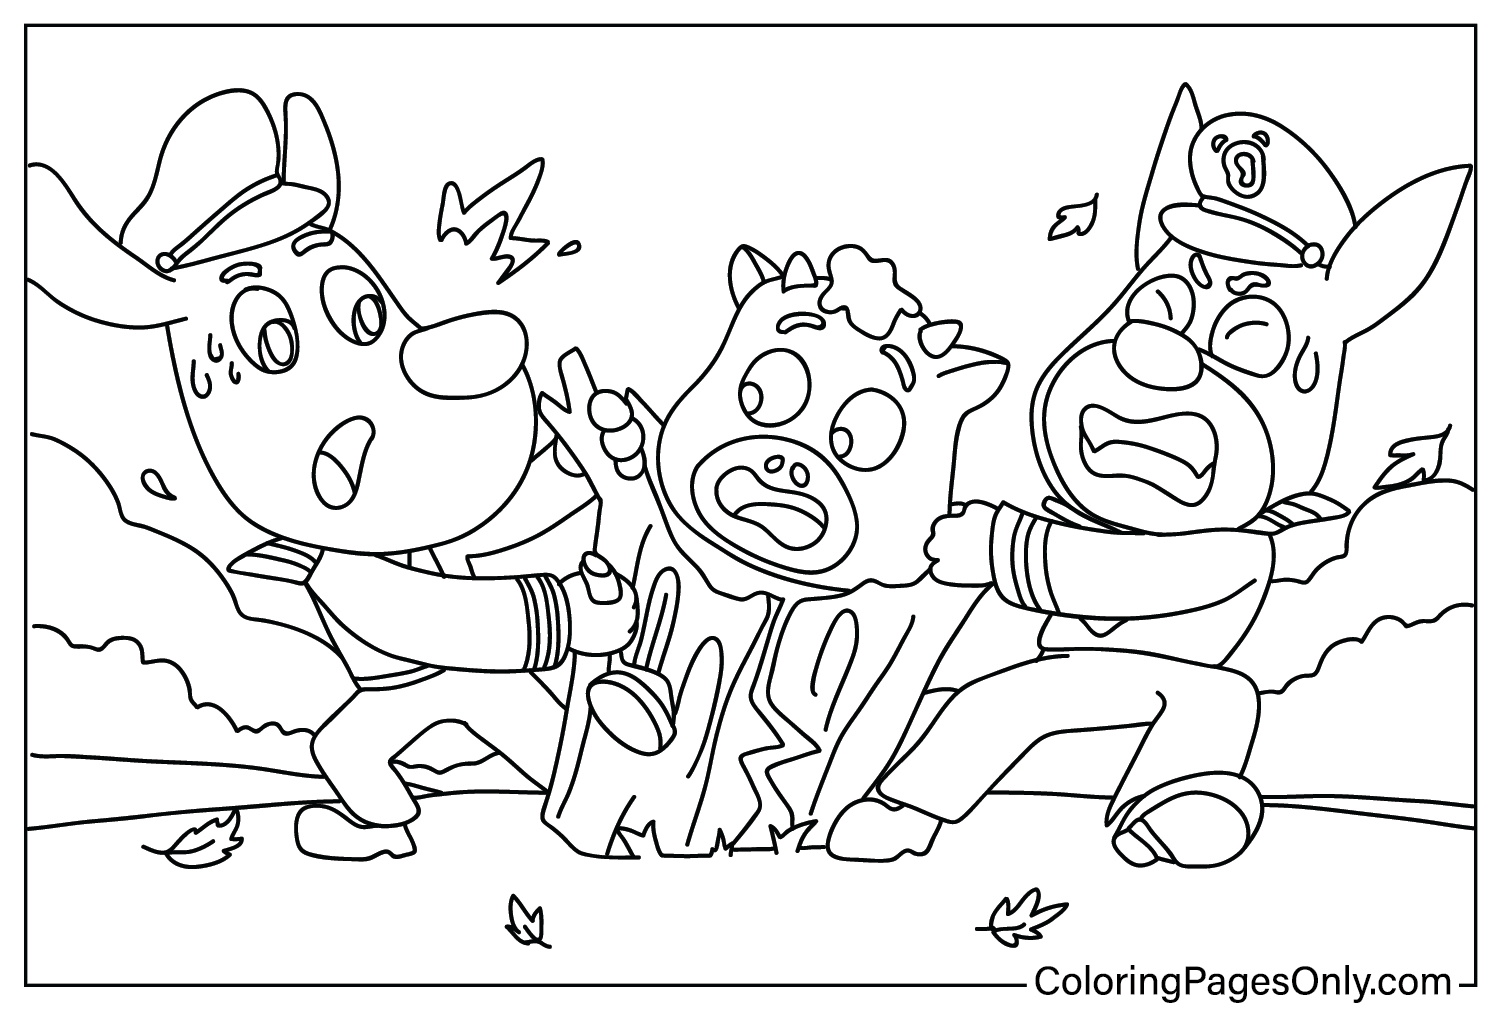 Safety Sheriff Labrador Coloring Pages to Printable from Safety Sheriff Labrador